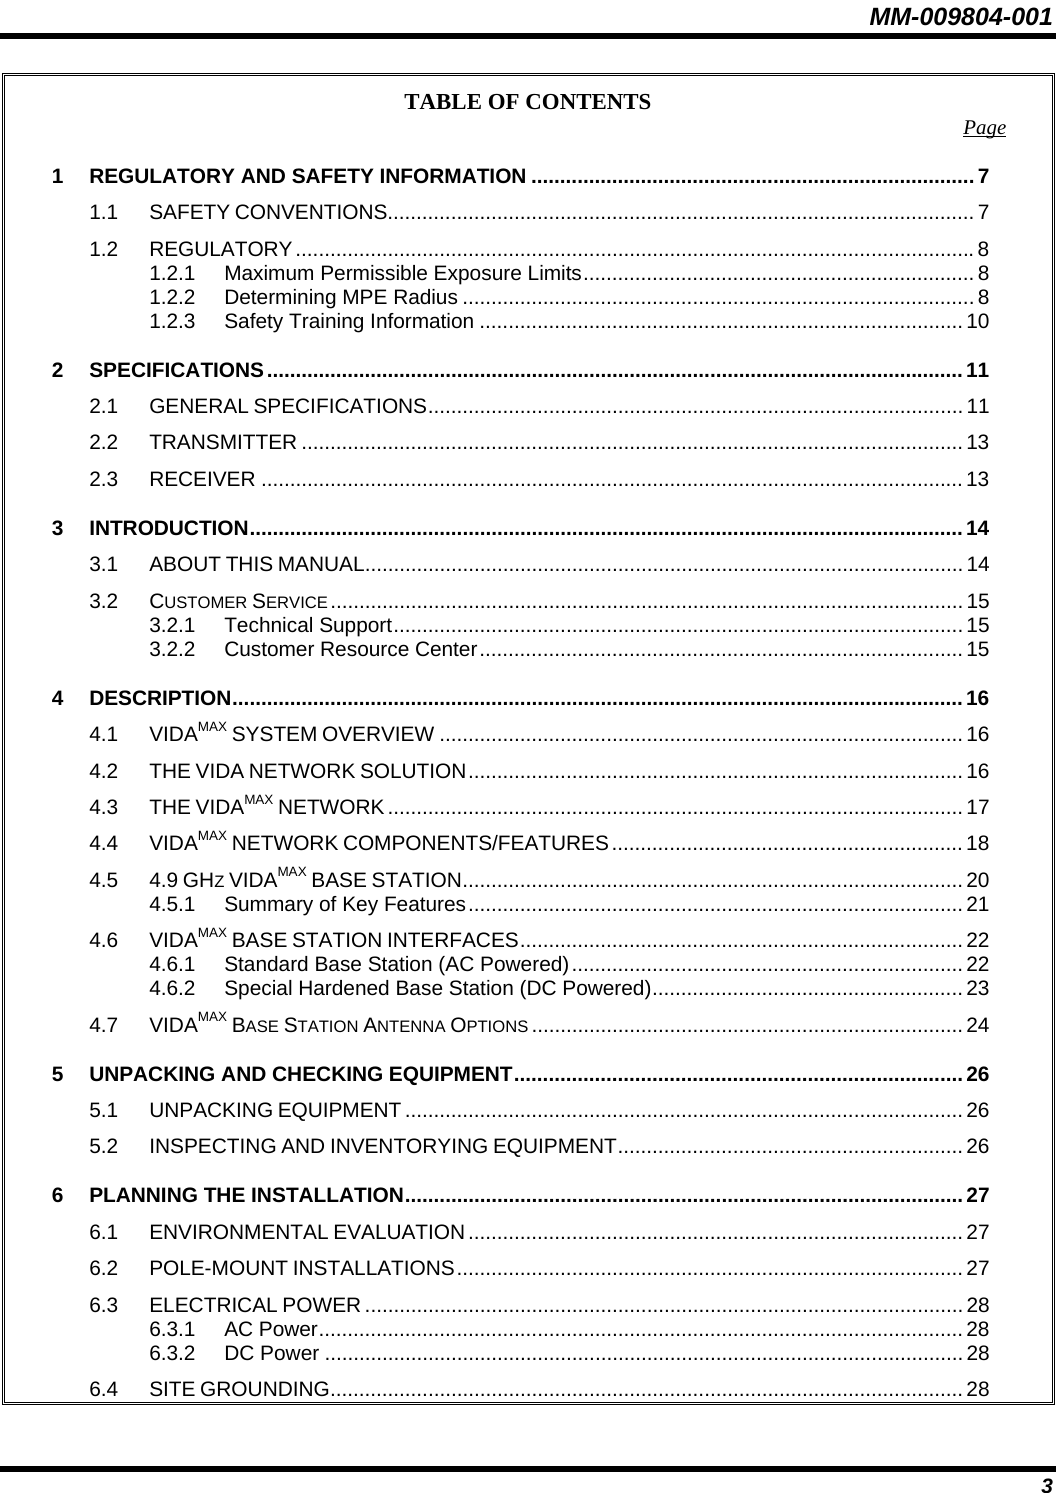 MM-009804-001 TABLE OF CONTENTS  Page1 REGULATORY AND SAFETY INFORMATION .............................................................................7 1.1 SAFETY CONVENTIONS...................................................................................................... 7 1.2 REGULATORY......................................................................................................................8 1.2.1 Maximum Permissible Exposure Limits.................................................................... 8 1.2.2 Determining MPE Radius .........................................................................................8 1.2.3 Safety Training Information .................................................................................... 10 2 SPECIFICATIONS.........................................................................................................................11 2.1 GENERAL SPECIFICATIONS............................................................................................. 11 2.2 TRANSMITTER ................................................................................................................... 13 2.3 RECEIVER .......................................................................................................................... 13 3 INTRODUCTION............................................................................................................................14 3.1 ABOUT THIS MANUAL........................................................................................................ 14 3.2 CUSTOMER SERVICE.............................................................................................................. 15 3.2.1 Technical Support................................................................................................... 15 3.2.2 Customer Resource Center....................................................................................15 4 DESCRIPTION...............................................................................................................................16 4.1 VIDAMAX SYSTEM OVERVIEW ........................................................................................... 16 4.2 THE VIDA NETWORK SOLUTION...................................................................................... 16 4.3 THE VIDAMAX NETWORK .................................................................................................... 17 4.4 VIDAMAX NETWORK COMPONENTS/FEATURES ............................................................. 18 4.5 4.9 GHZ VIDAMAX BASE STATION....................................................................................... 20 4.5.1 Summary of Key Features...................................................................................... 21 4.6 VIDAMAX BASE STATION INTERFACES............................................................................. 22 4.6.1 Standard Base Station (AC Powered).................................................................... 22 4.6.2 Special Hardened Base Station (DC Powered)...................................................... 23 4.7 VIDAMAX BASE STATION ANTENNA OPTIONS ........................................................................... 24 5 UNPACKING AND CHECKING EQUIPMENT.............................................................................. 26 5.1 UNPACKING EQUIPMENT ................................................................................................. 26 5.2 INSPECTING AND INVENTORYING EQUIPMENT............................................................ 26 6 PLANNING THE INSTALLATION.................................................................................................27 6.1 ENVIRONMENTAL EVALUATION ...................................................................................... 27 6.2 POLE-MOUNT INSTALLATIONS........................................................................................ 27 6.3 ELECTRICAL POWER ........................................................................................................ 28 6.3.1 AC Power................................................................................................................ 28 6.3.2 DC Power ............................................................................................................... 28 6.4 SITE GROUNDING.............................................................................................................. 28  3 